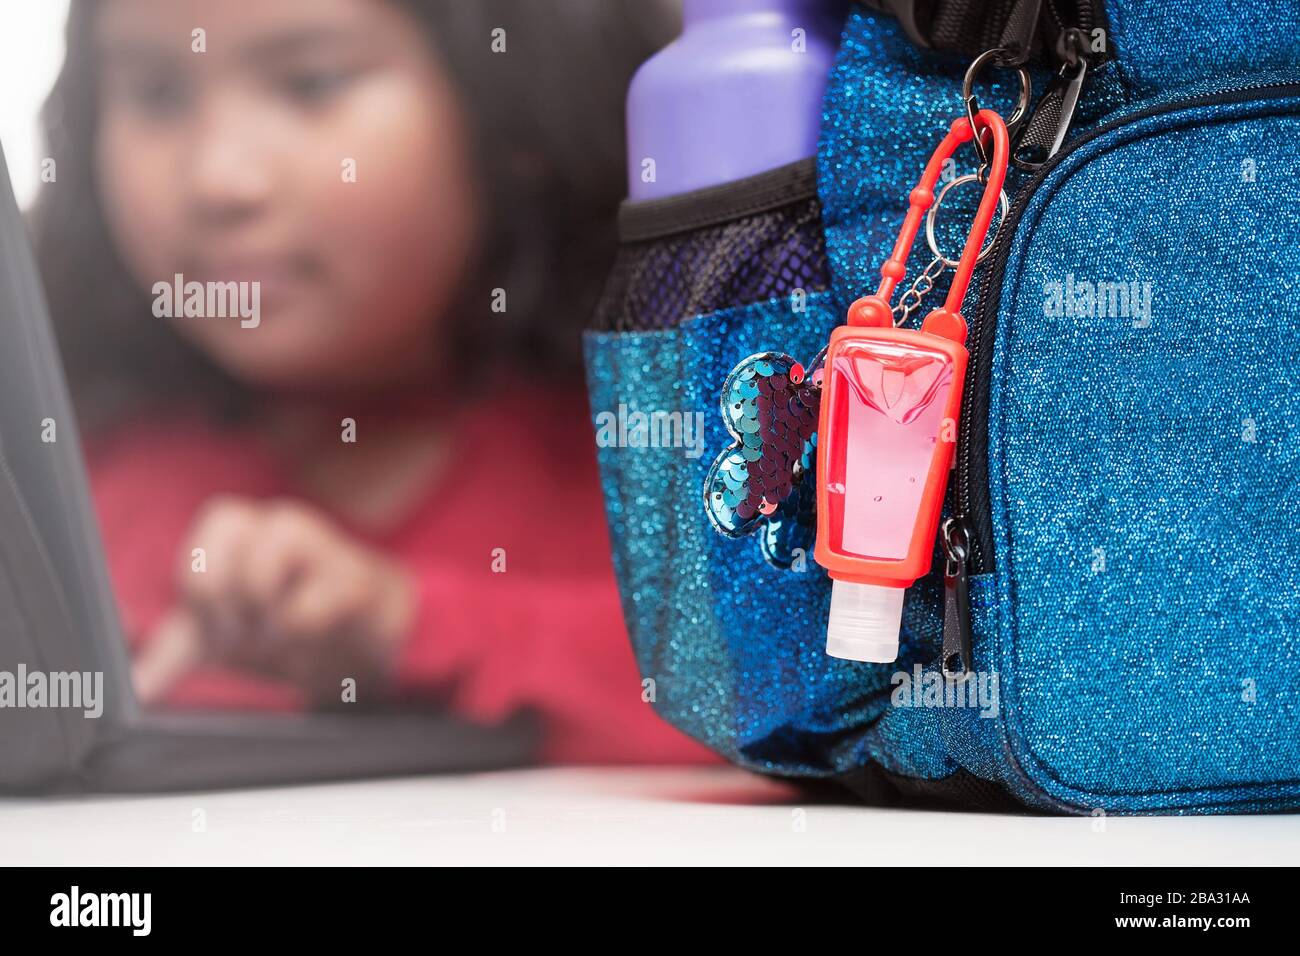 Gel hanitizer attached to a backpack with metal water bottle placed on a desk, and the student is using a laptop in the background. Stock Photo